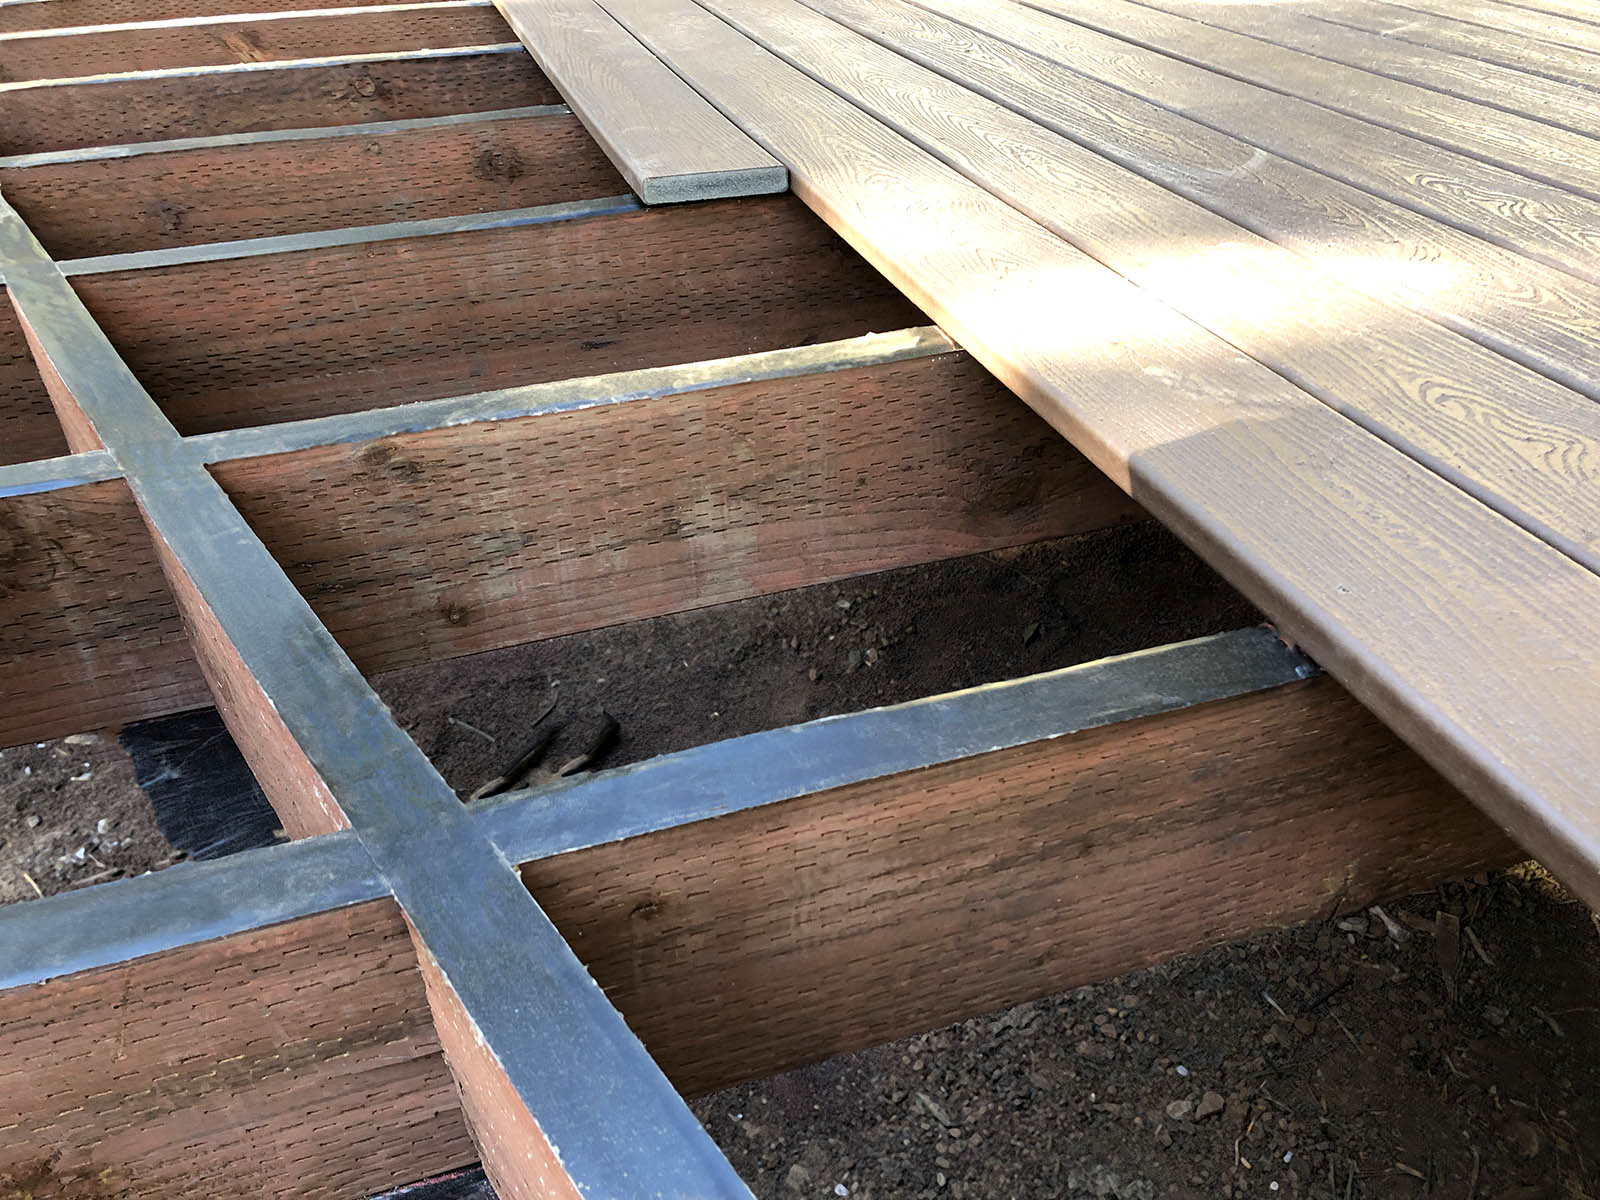 Installing Trex Protect deck tape on the tops of deck joists